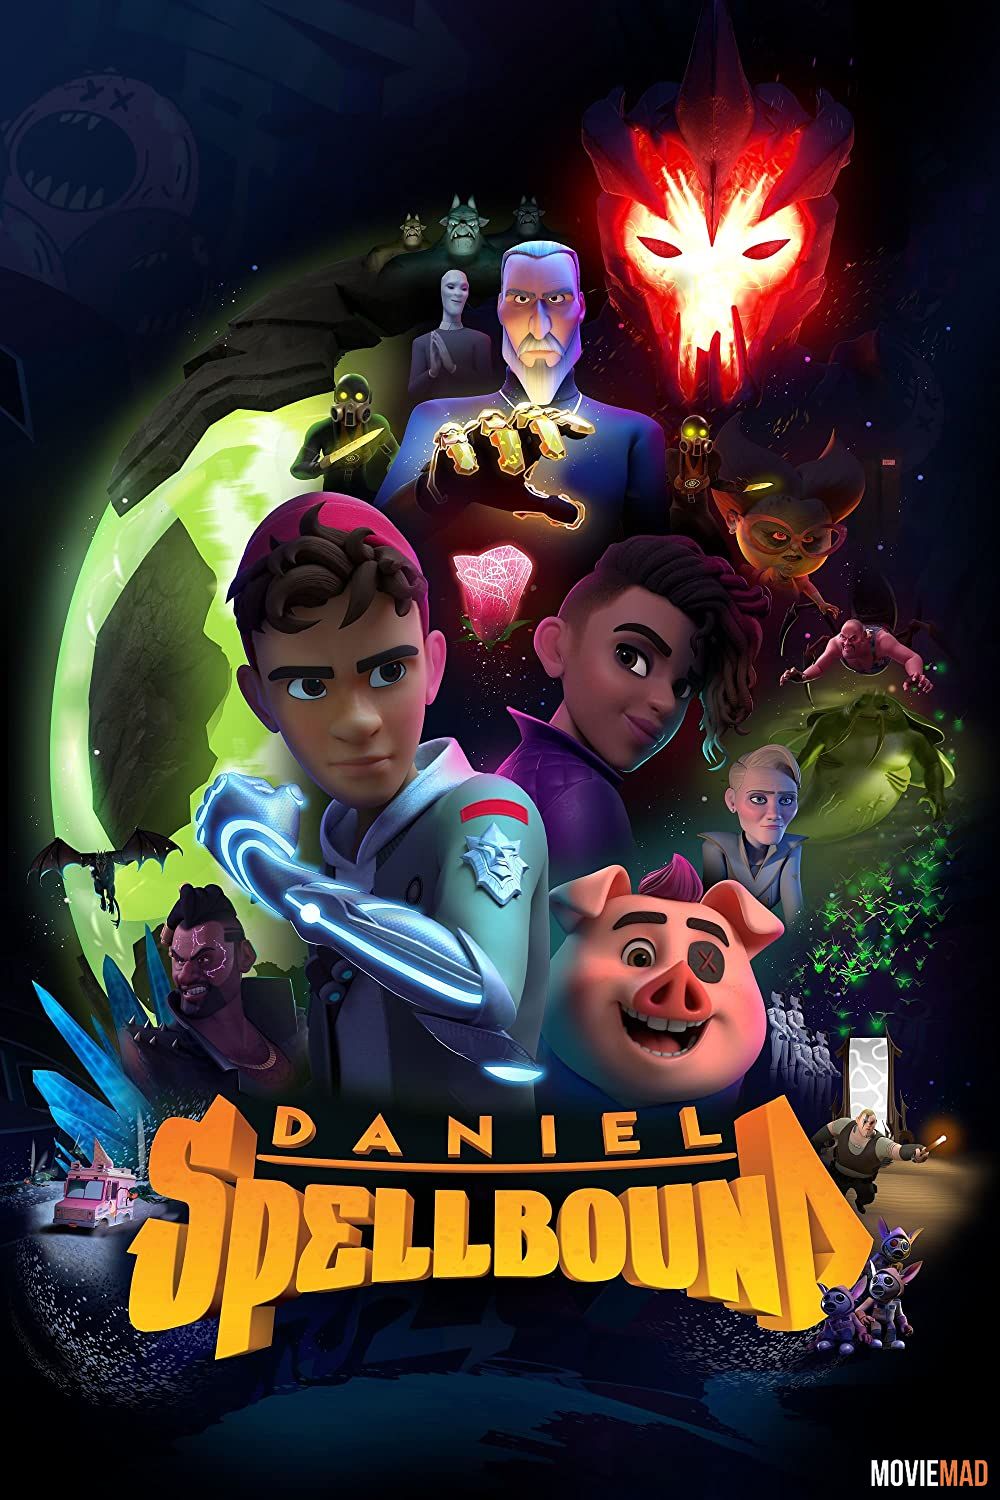 Daniel Spellbound S01 (2022) Complete Hindi Dubbed ORG NF HDRip 720p 480p Movie download